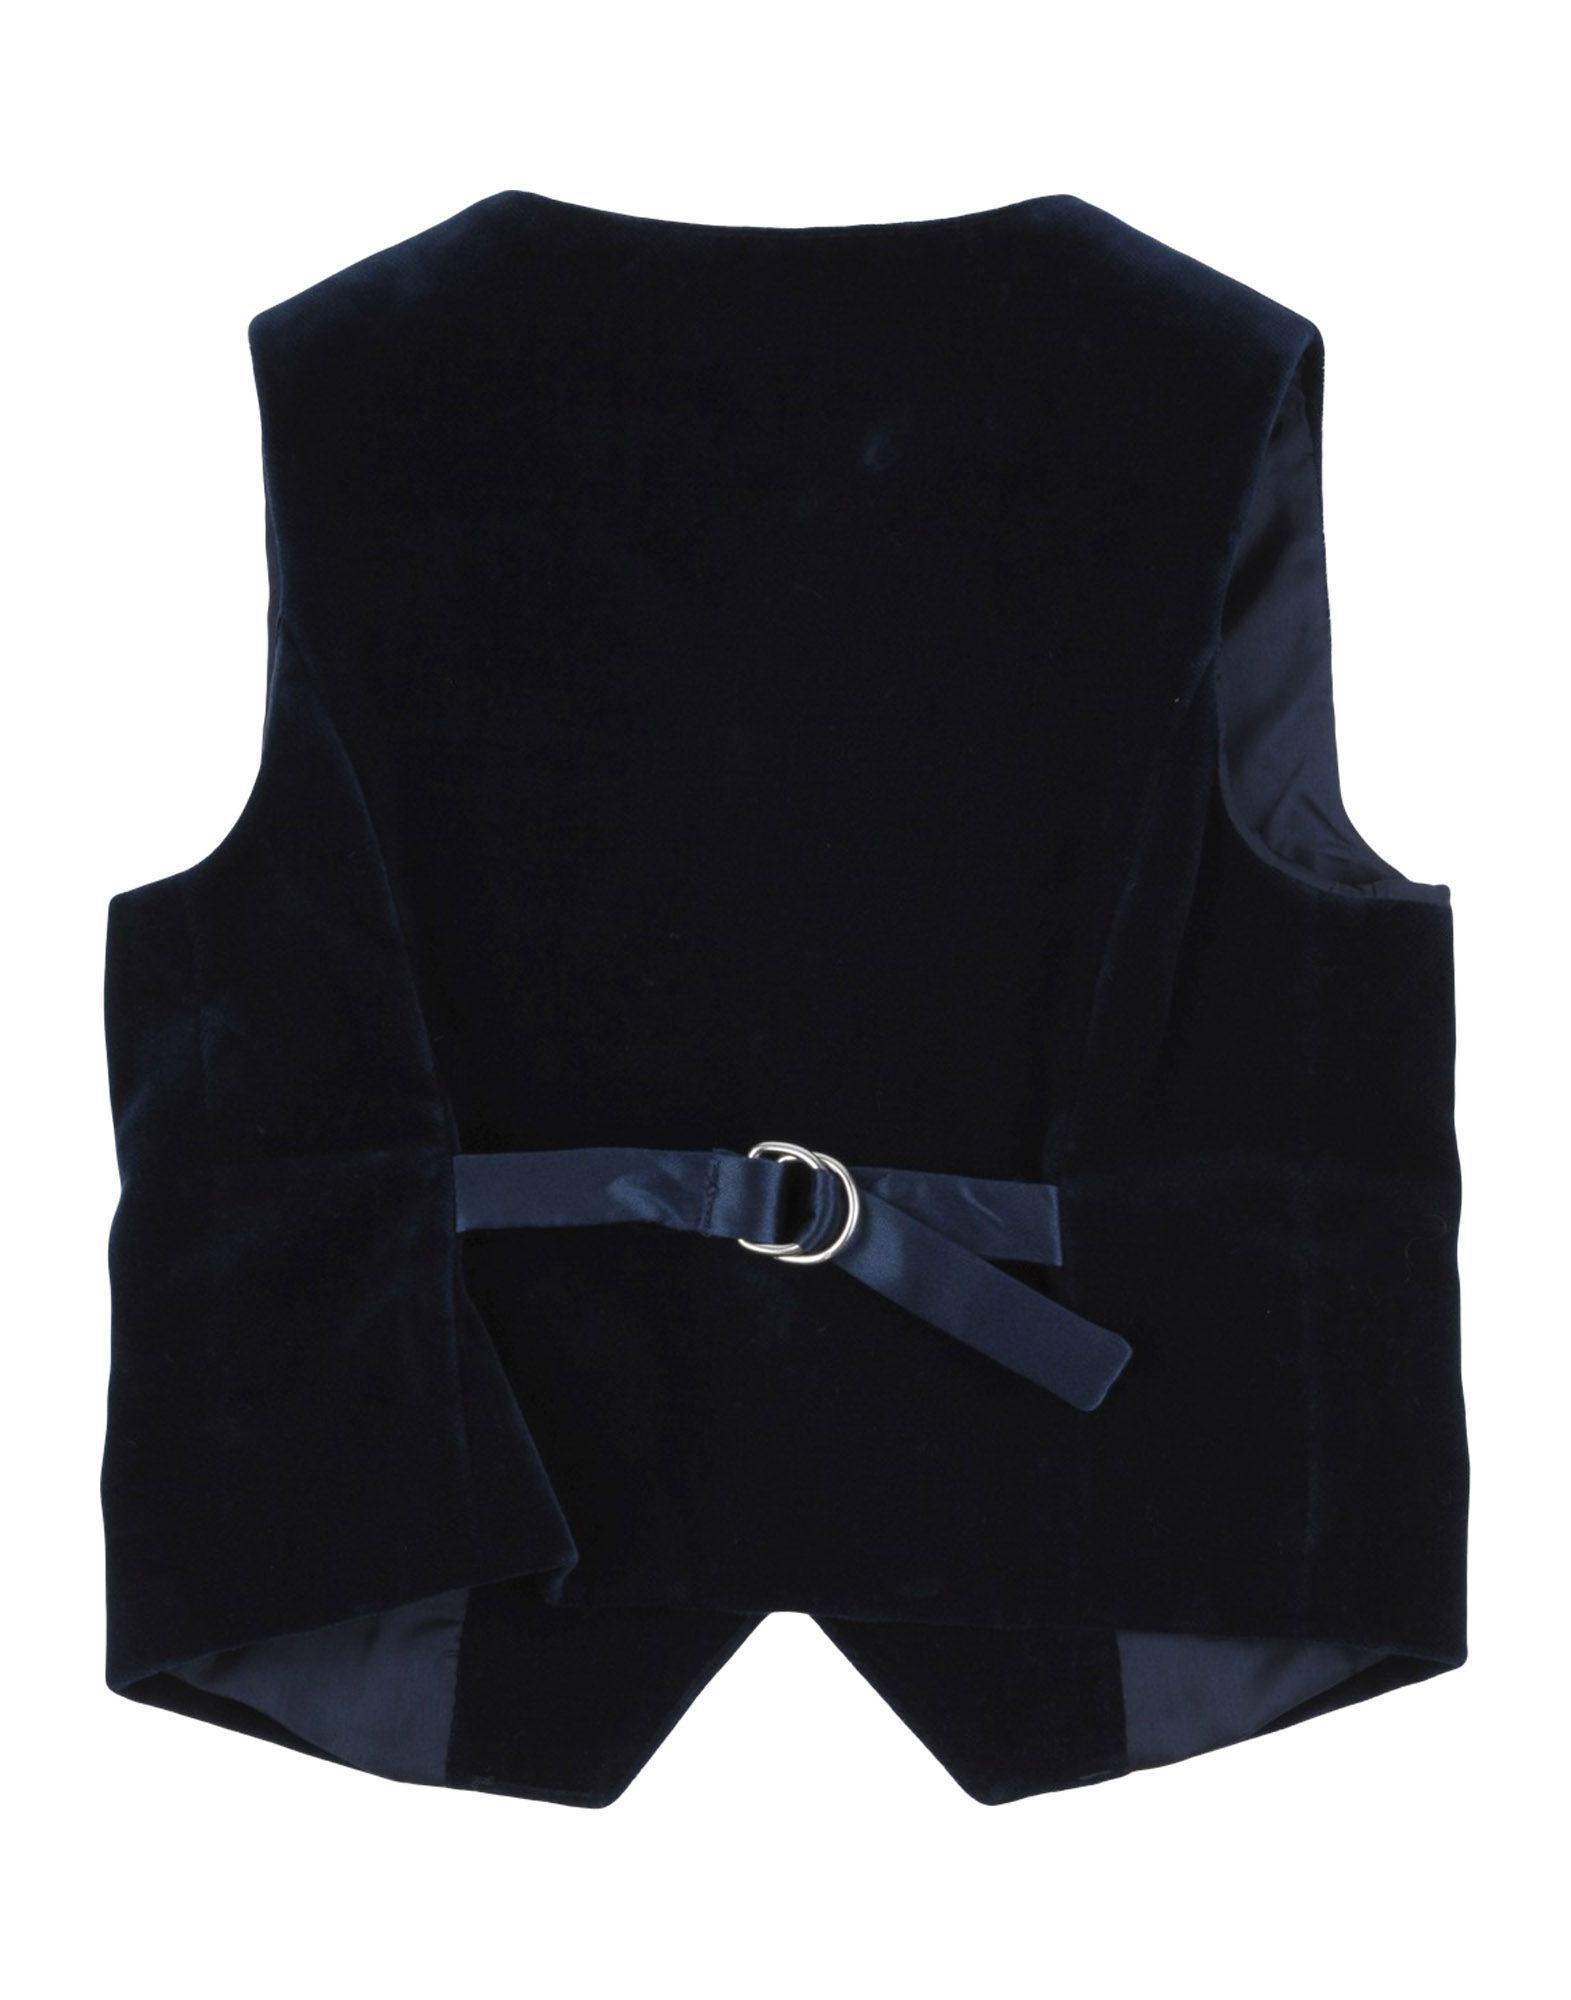 velvet, logo, solid colour, multipockets, button closing, v-neckline, single-breasted , sleeveless, lined interior, do not wash, dry cleanable, iron at 110� c max, do not bleach, do not tumble dry, button closing waistcoat with belt